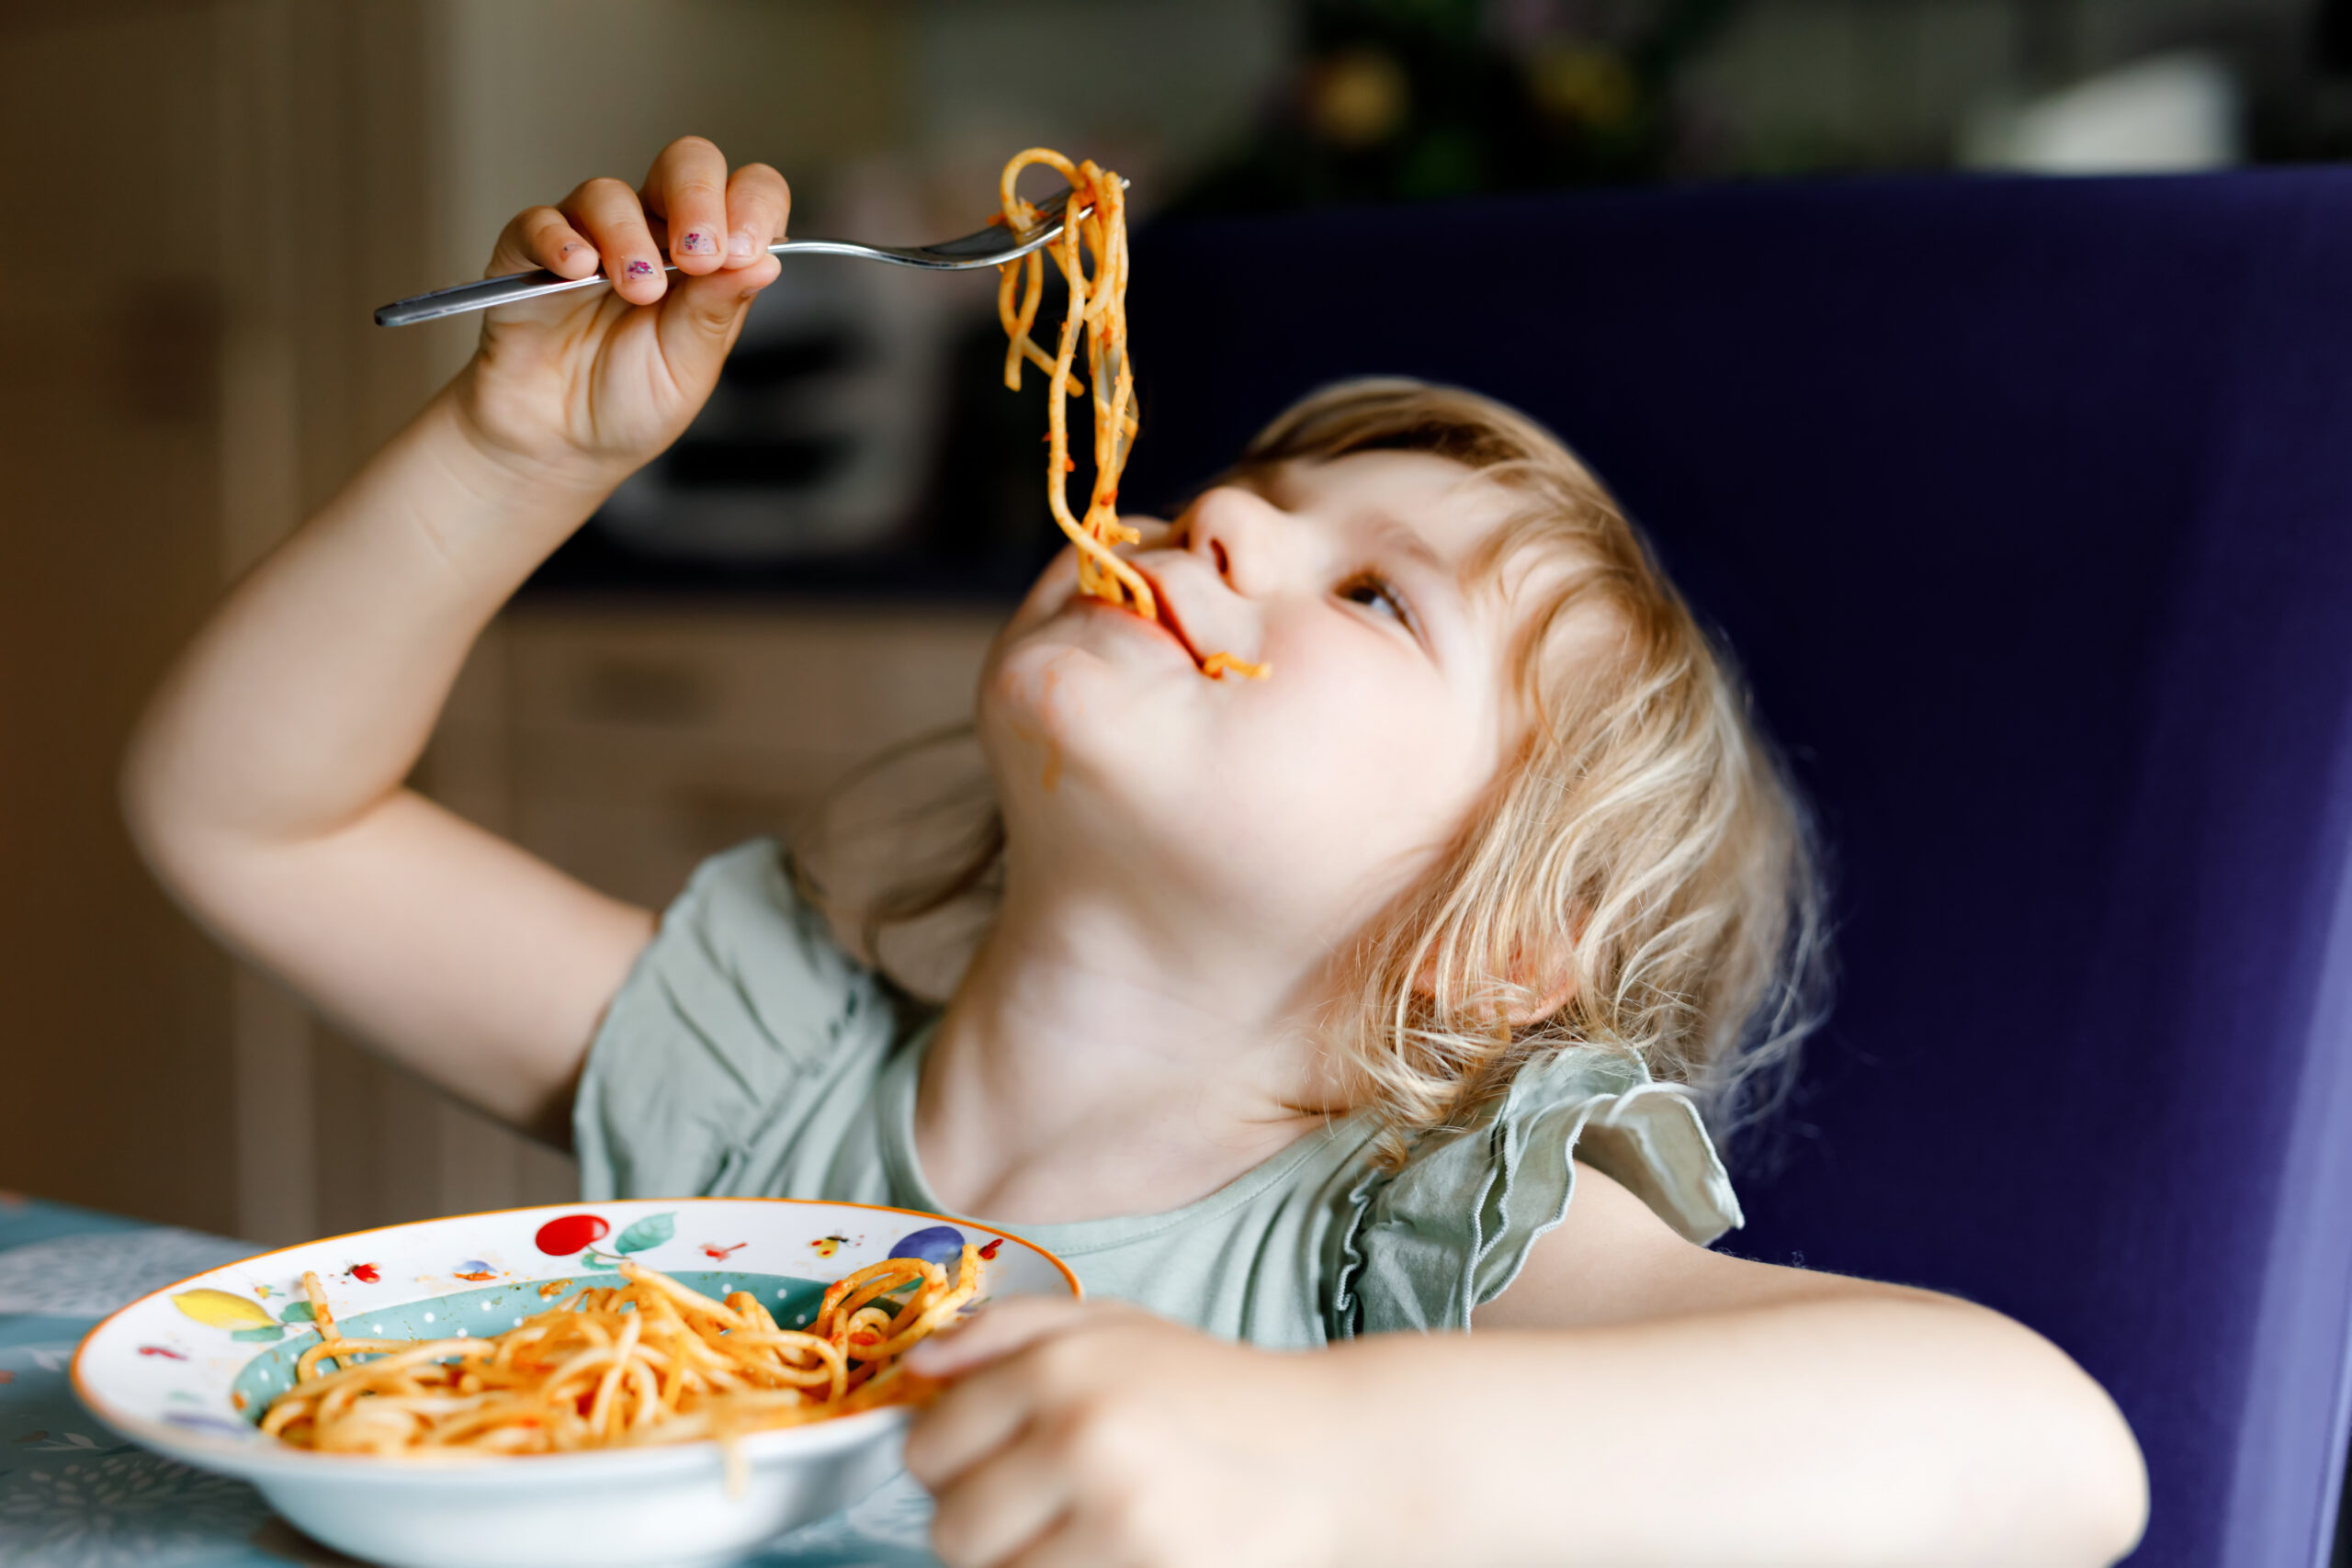 Toddler eating spaghetti at the table